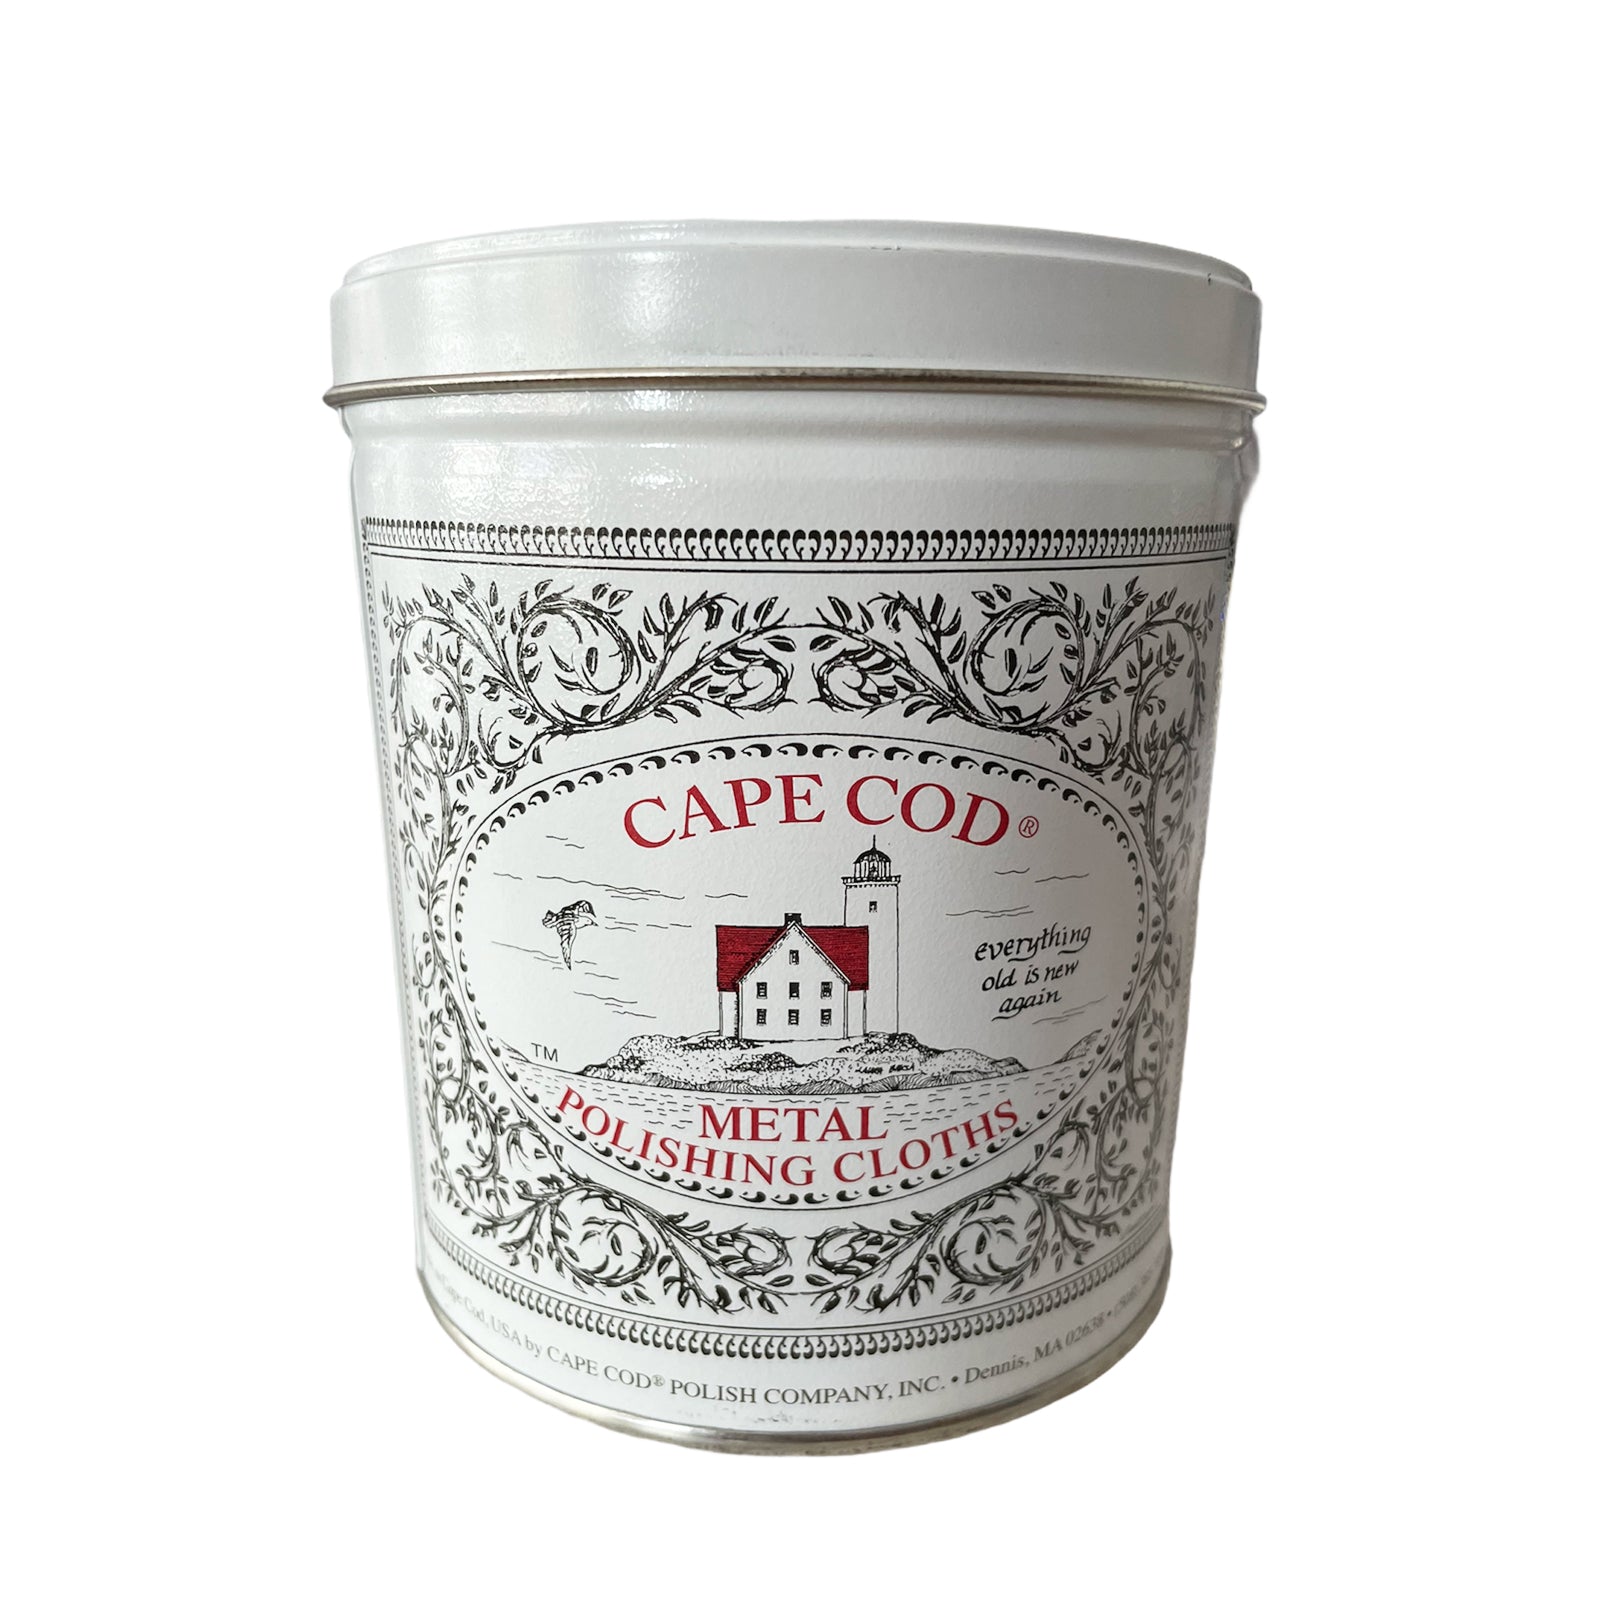 Cape Cod Fine Metal Polishing Cloths Cleans Polishes Watches